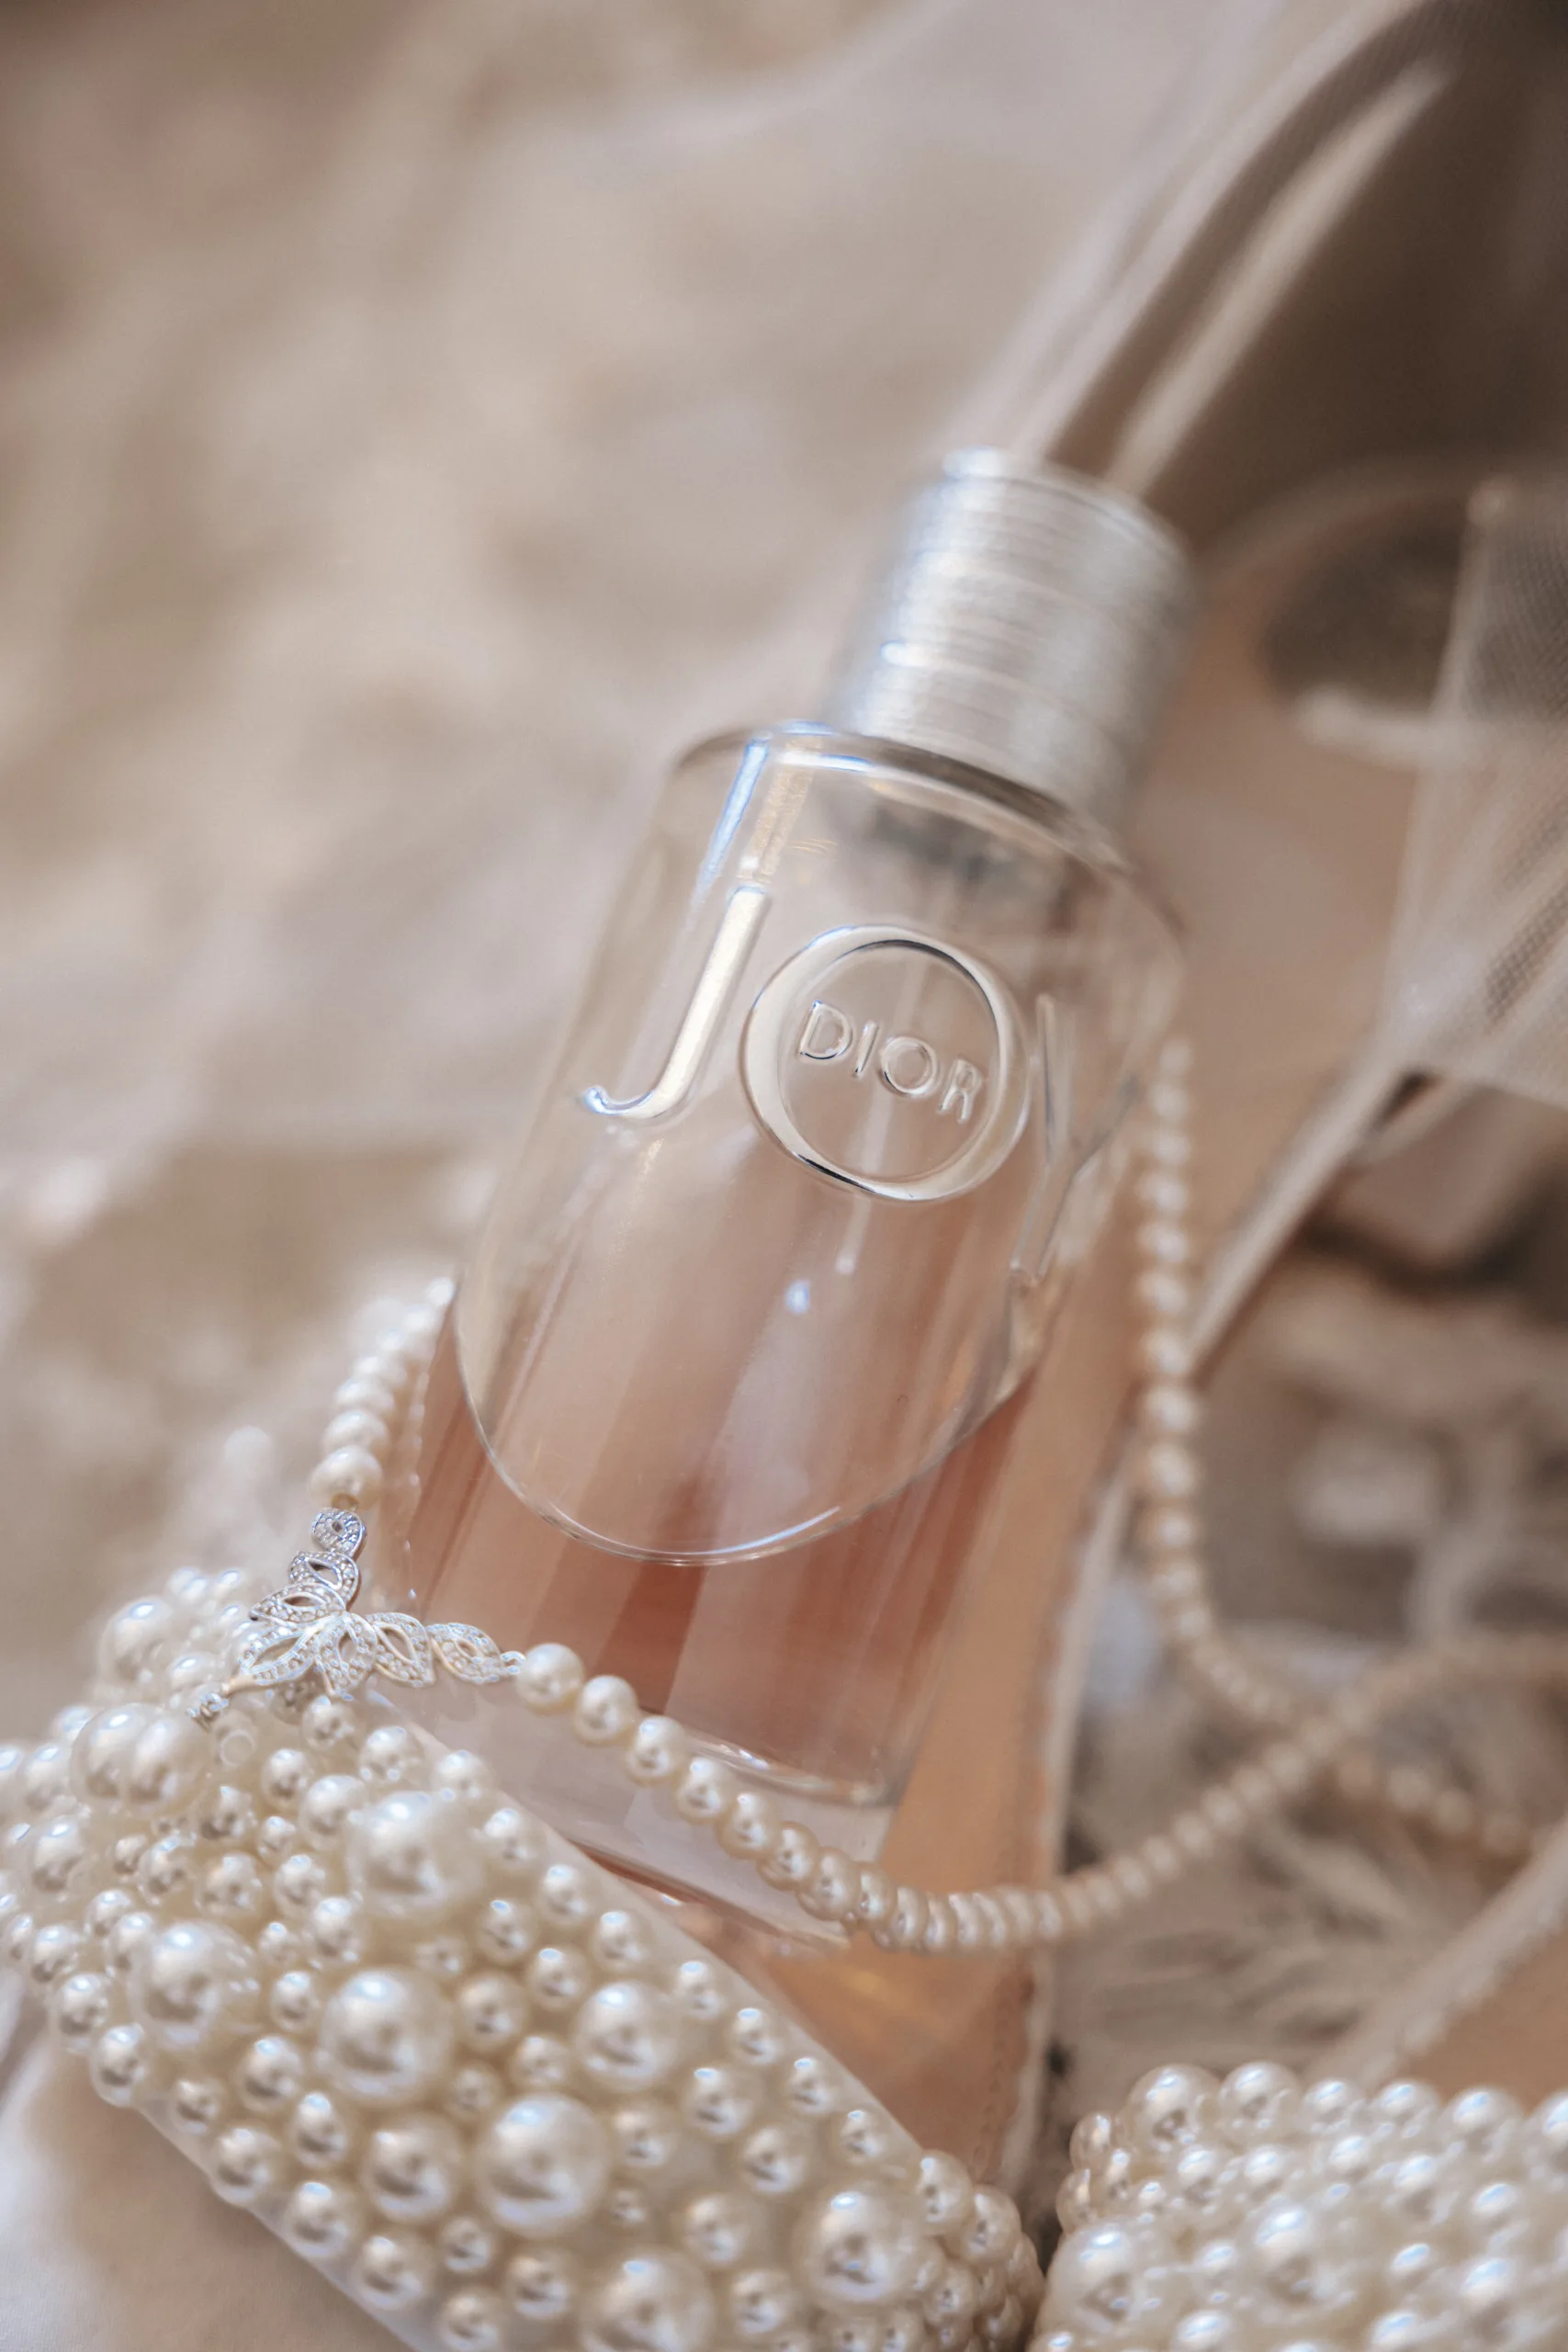 A pair of wedding shoes adorned with elegant pearls and a bottle of exquisite perfume designed for your special day.